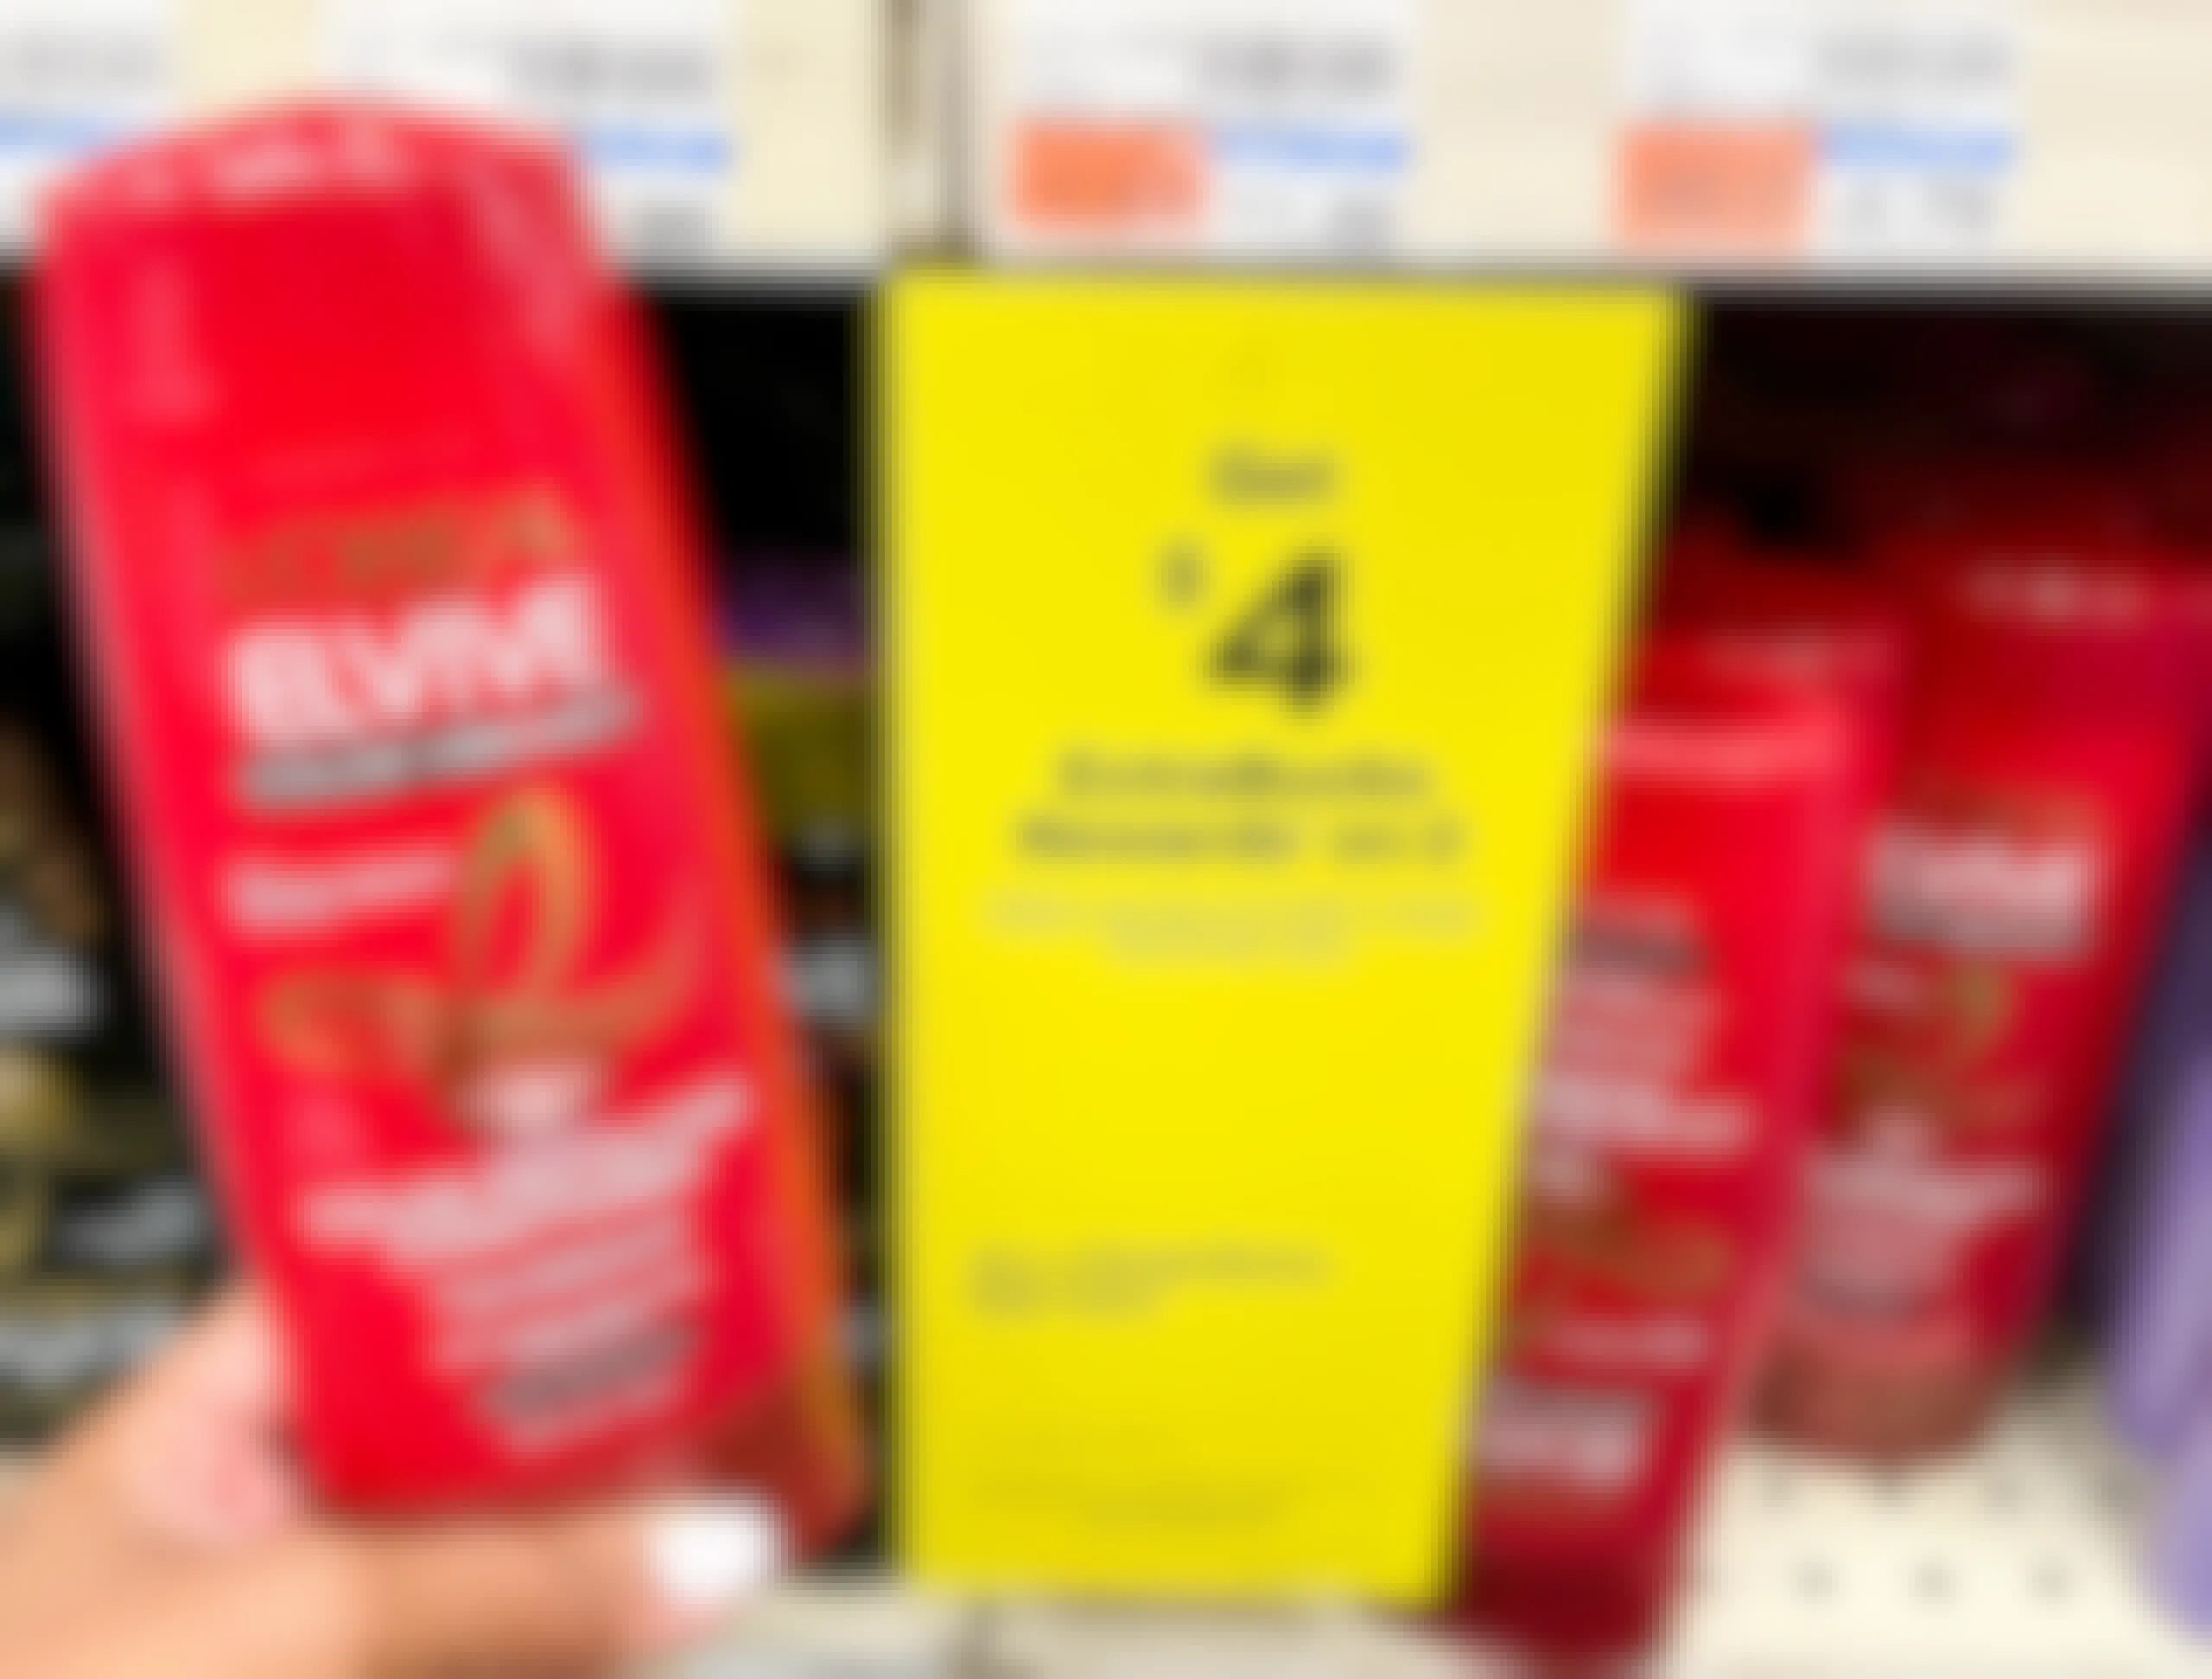 person holding a bottle of L'Oreal Elvive next to sales tag